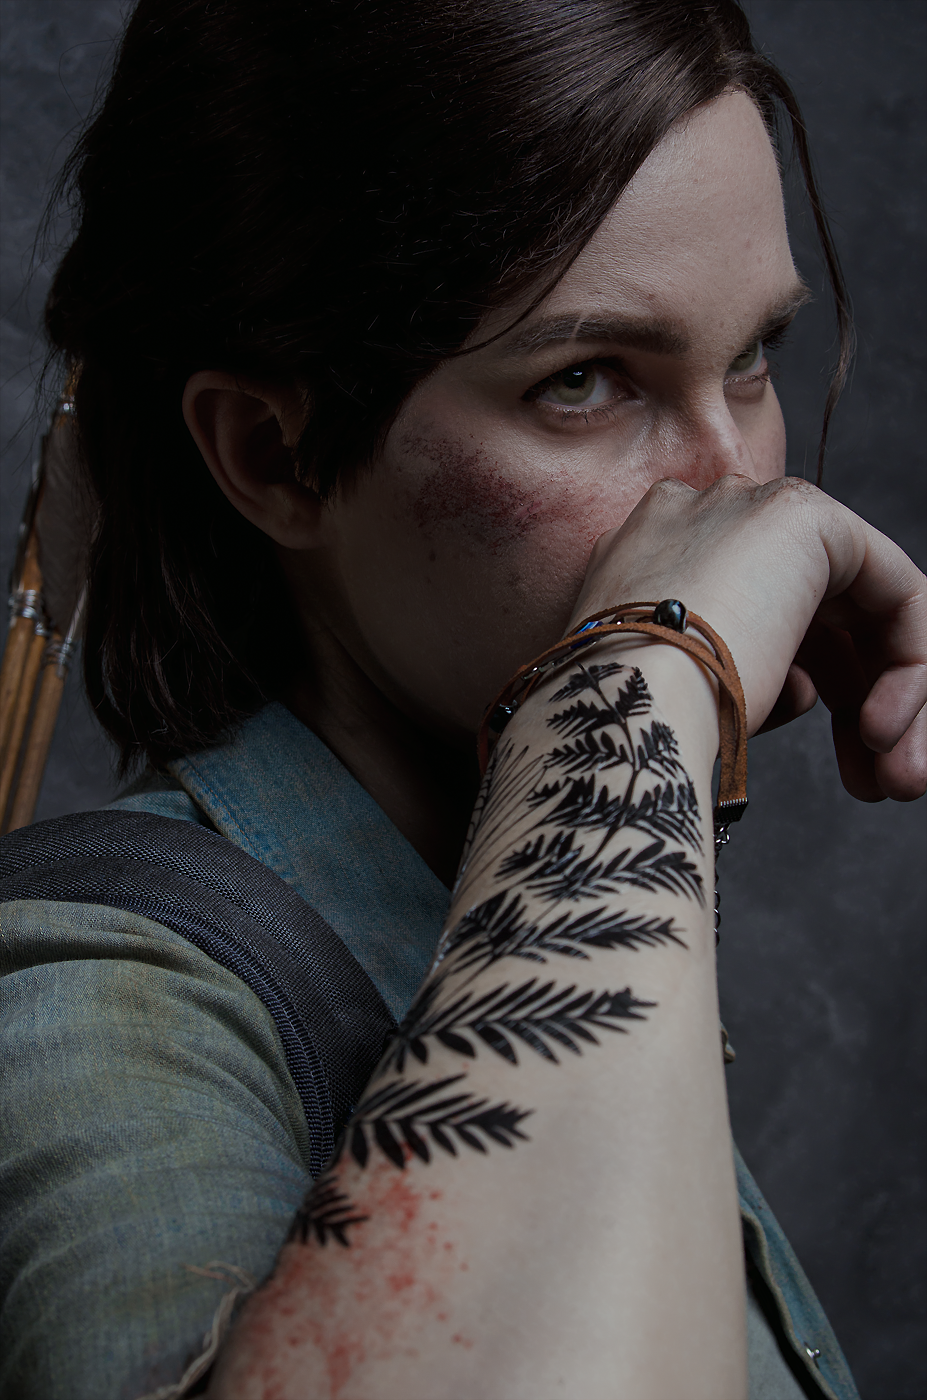 Got a rendition of Ellie's tattoo from The Last of Us 2! Skillfully drawn  by @hypnatic on Instagram - thelastofus post - Imgur